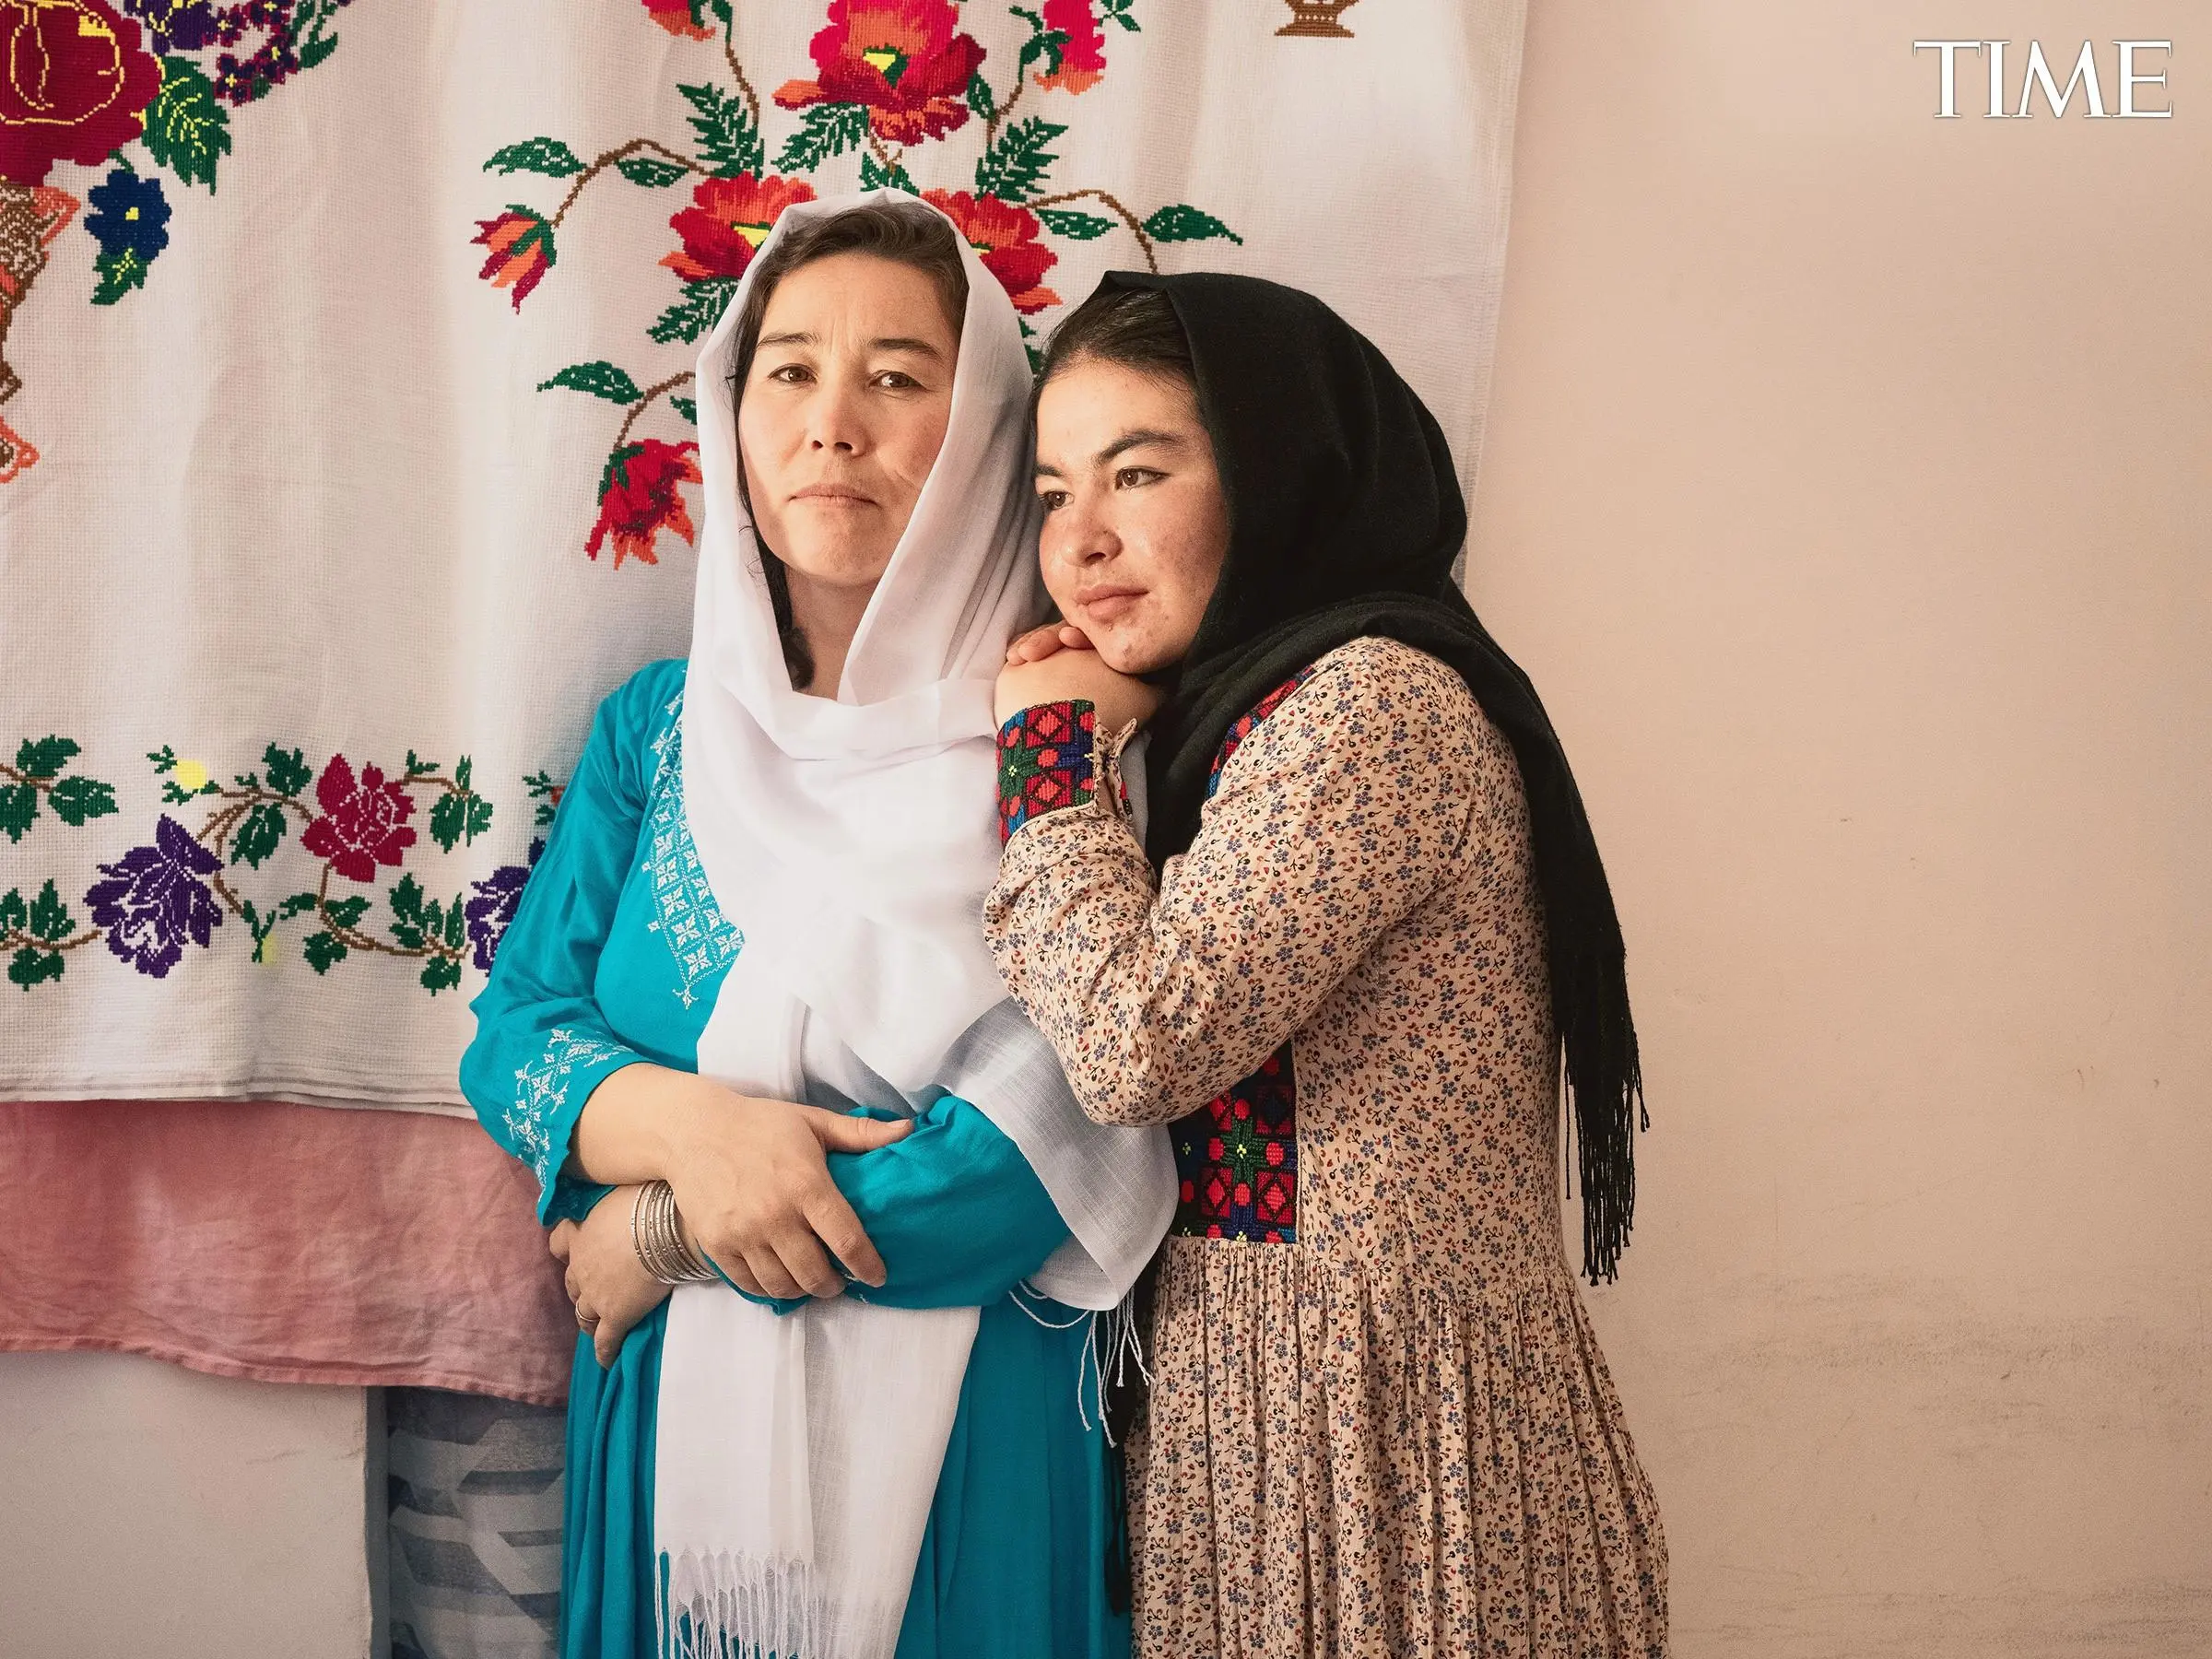 An Afghan woman and her daughter embrace.